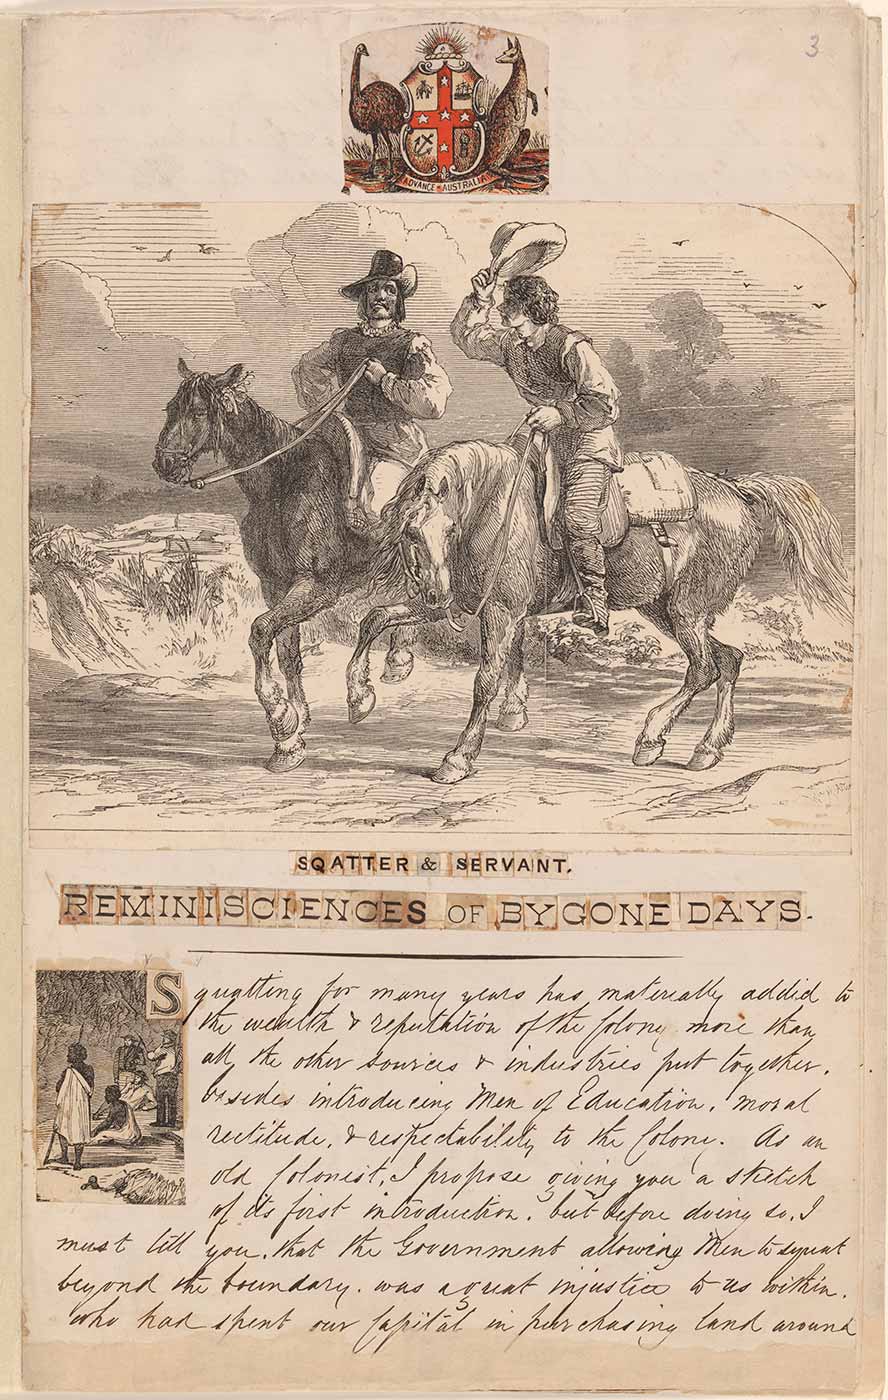 Old page out of a book featuring a coat of arms, an illustration of two men on horses, the title 'SWATTER & SERVANT, REMINISCIENCES OF BYGONE DAYS' and handwritten text with a smaller illustration in line with the text. - click to view larger image